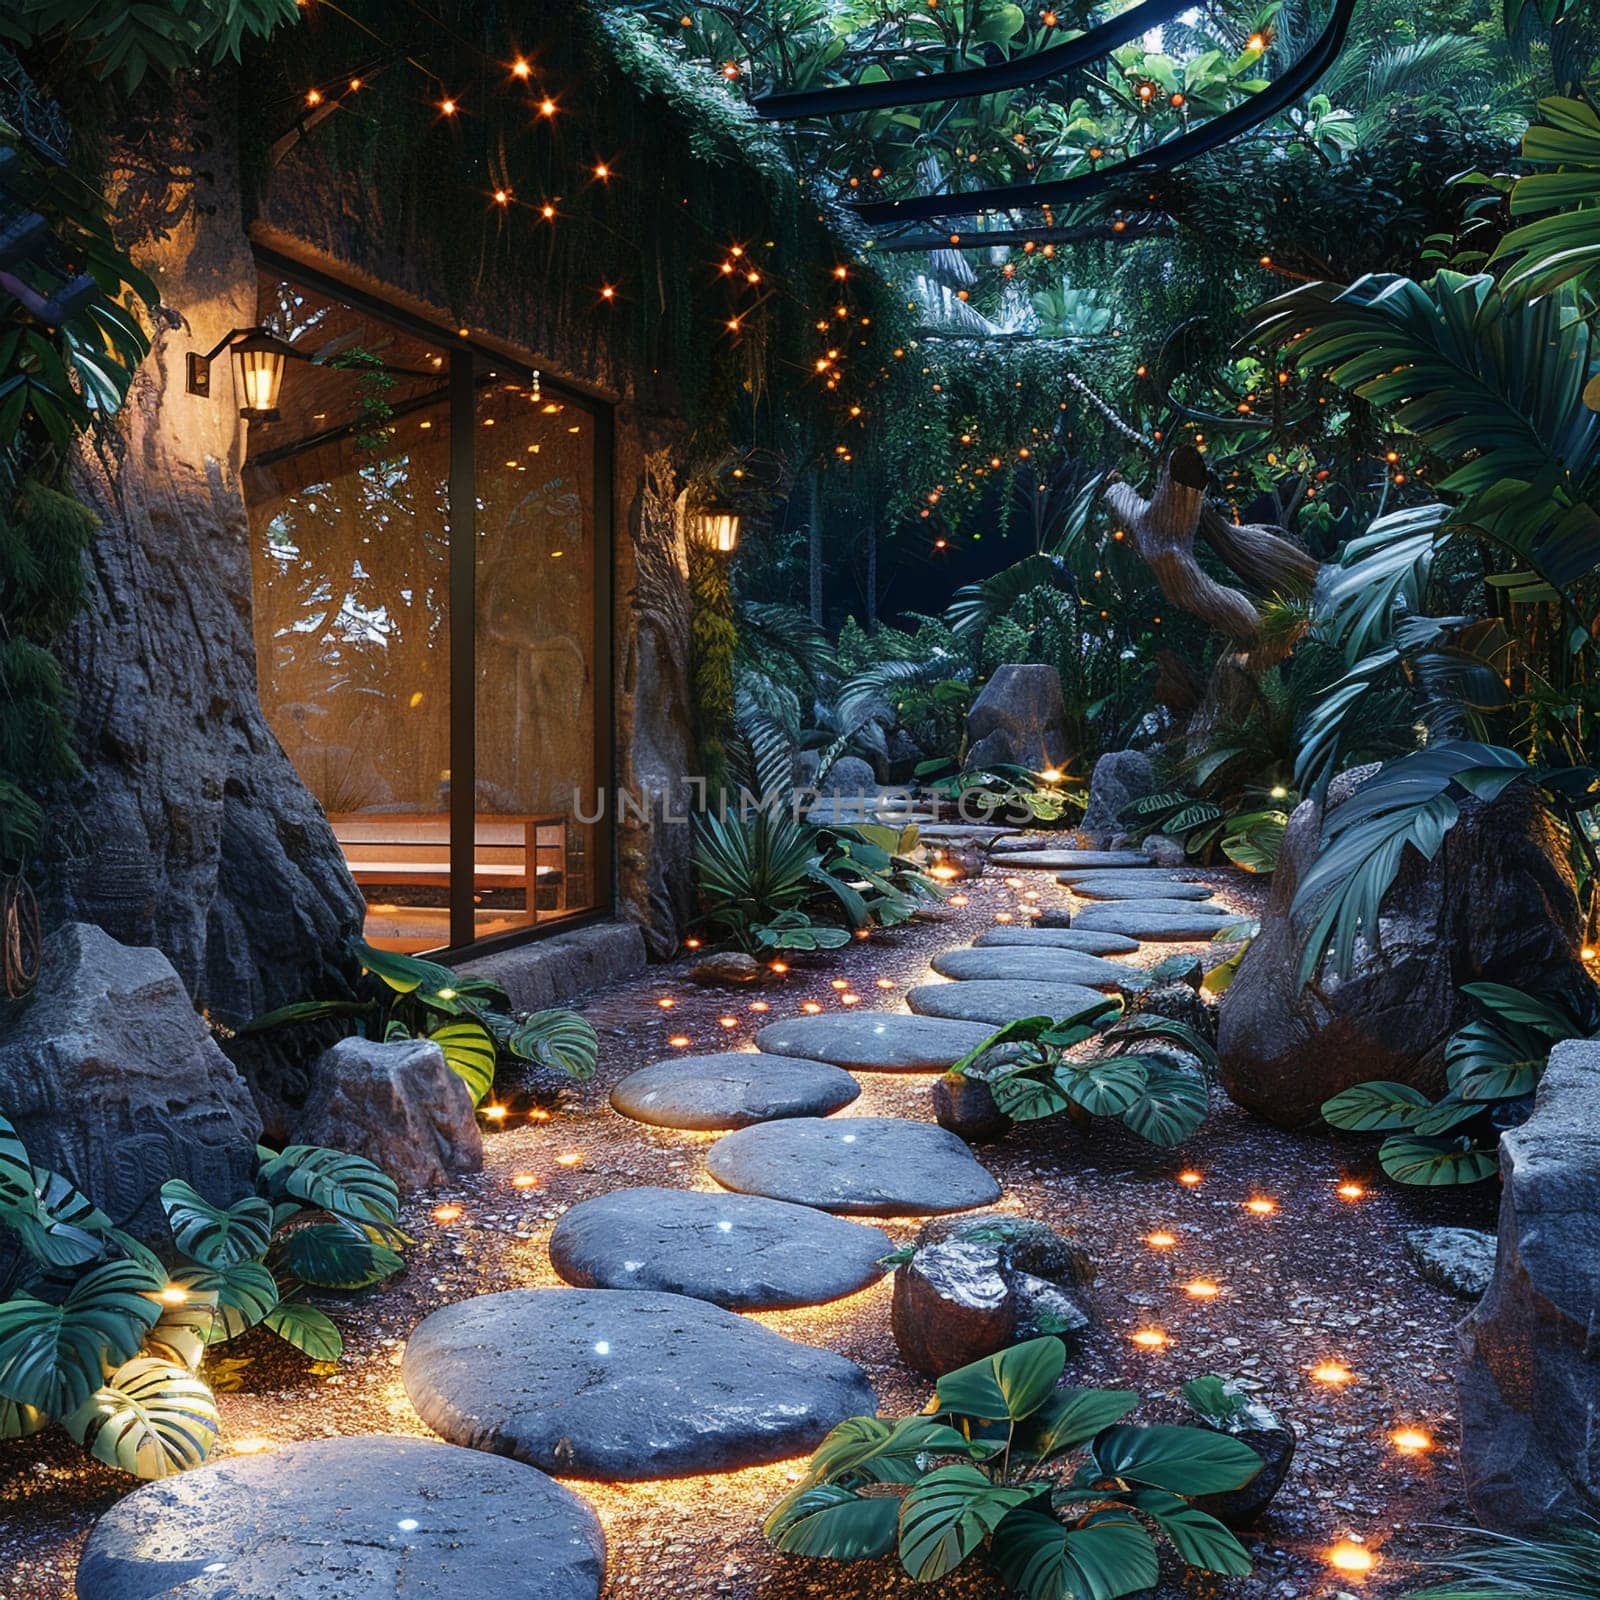 Moonlit garden with luminescent plants and a star-gazing area.